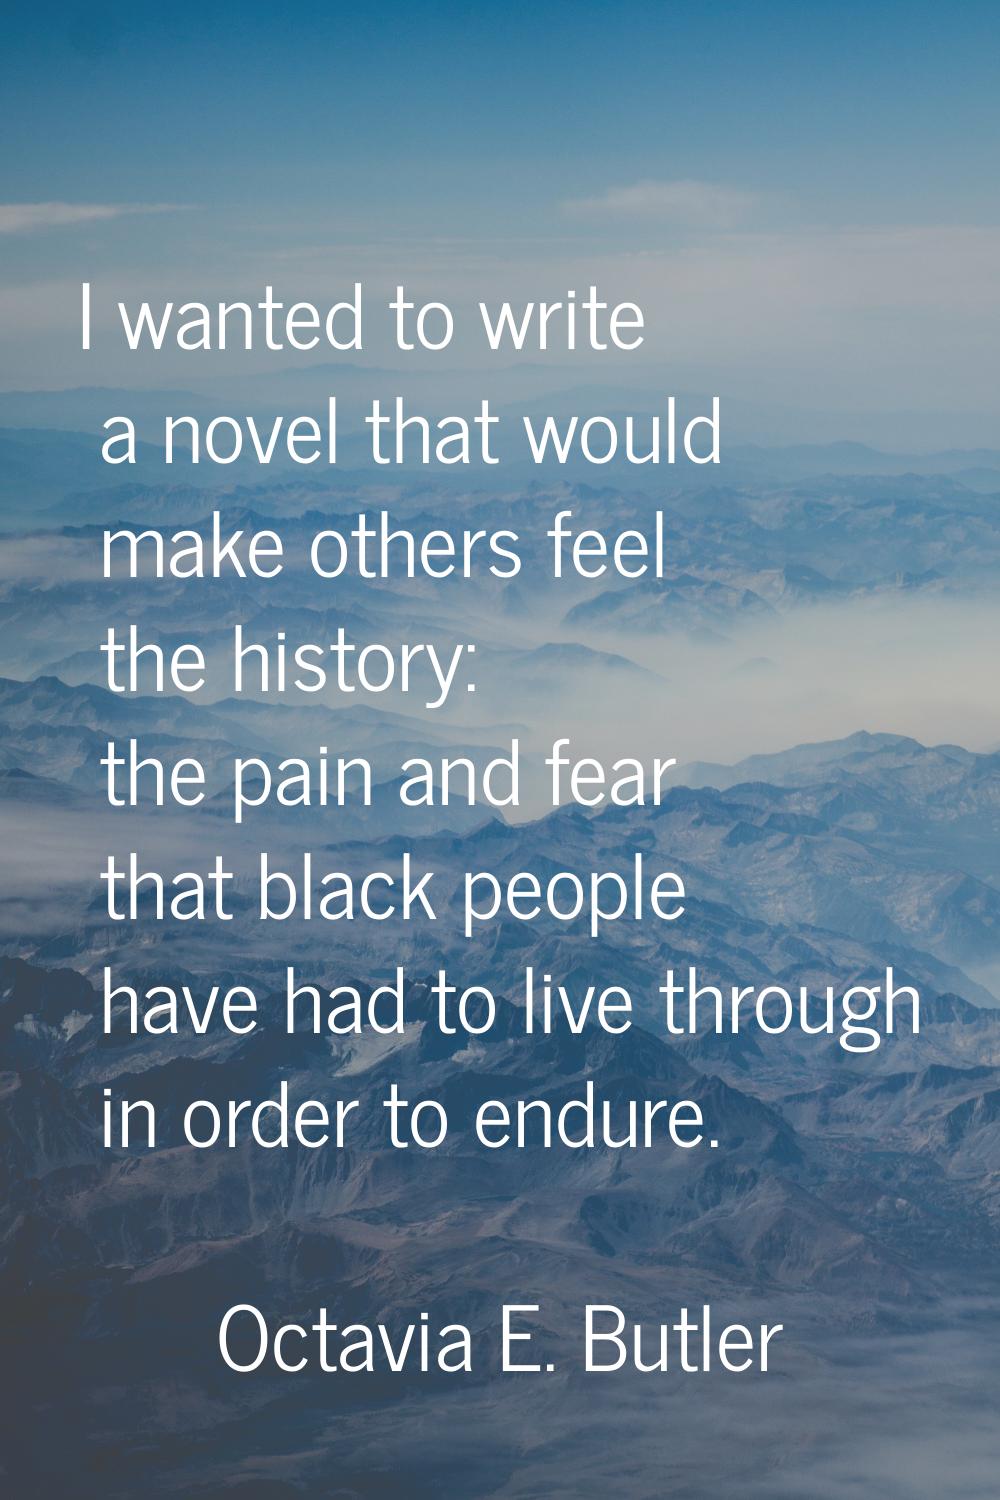 I wanted to write a novel that would make others feel the history: the pain and fear that black peo